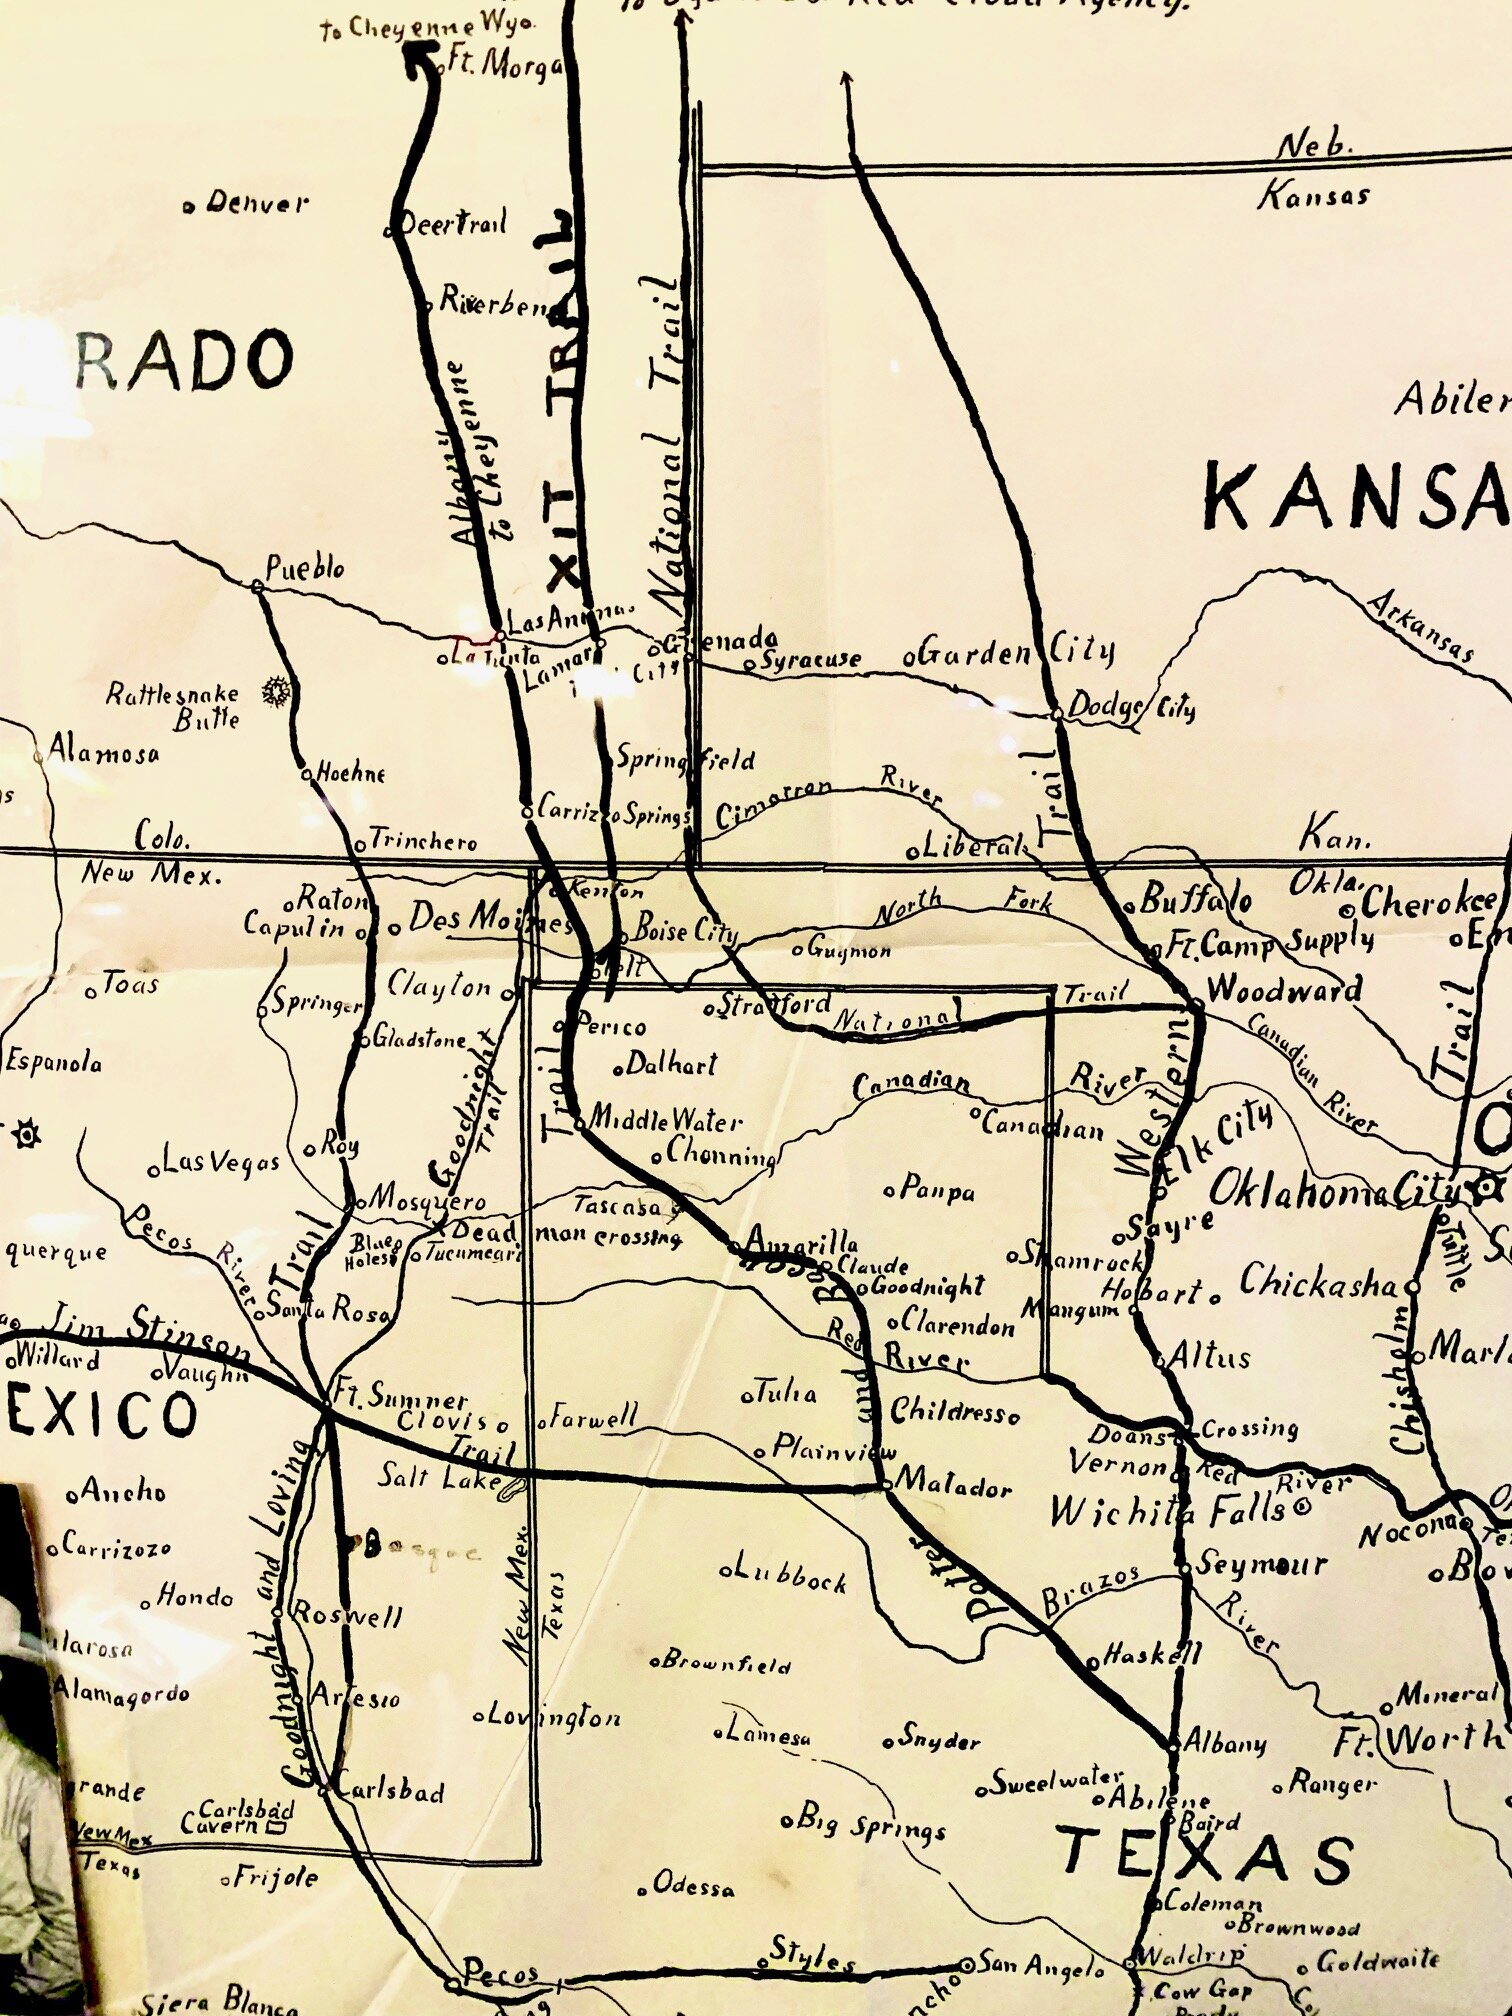 Map by Col. Jack Potter.  This one hangs in Eklund Hotel in Clayton, NM.